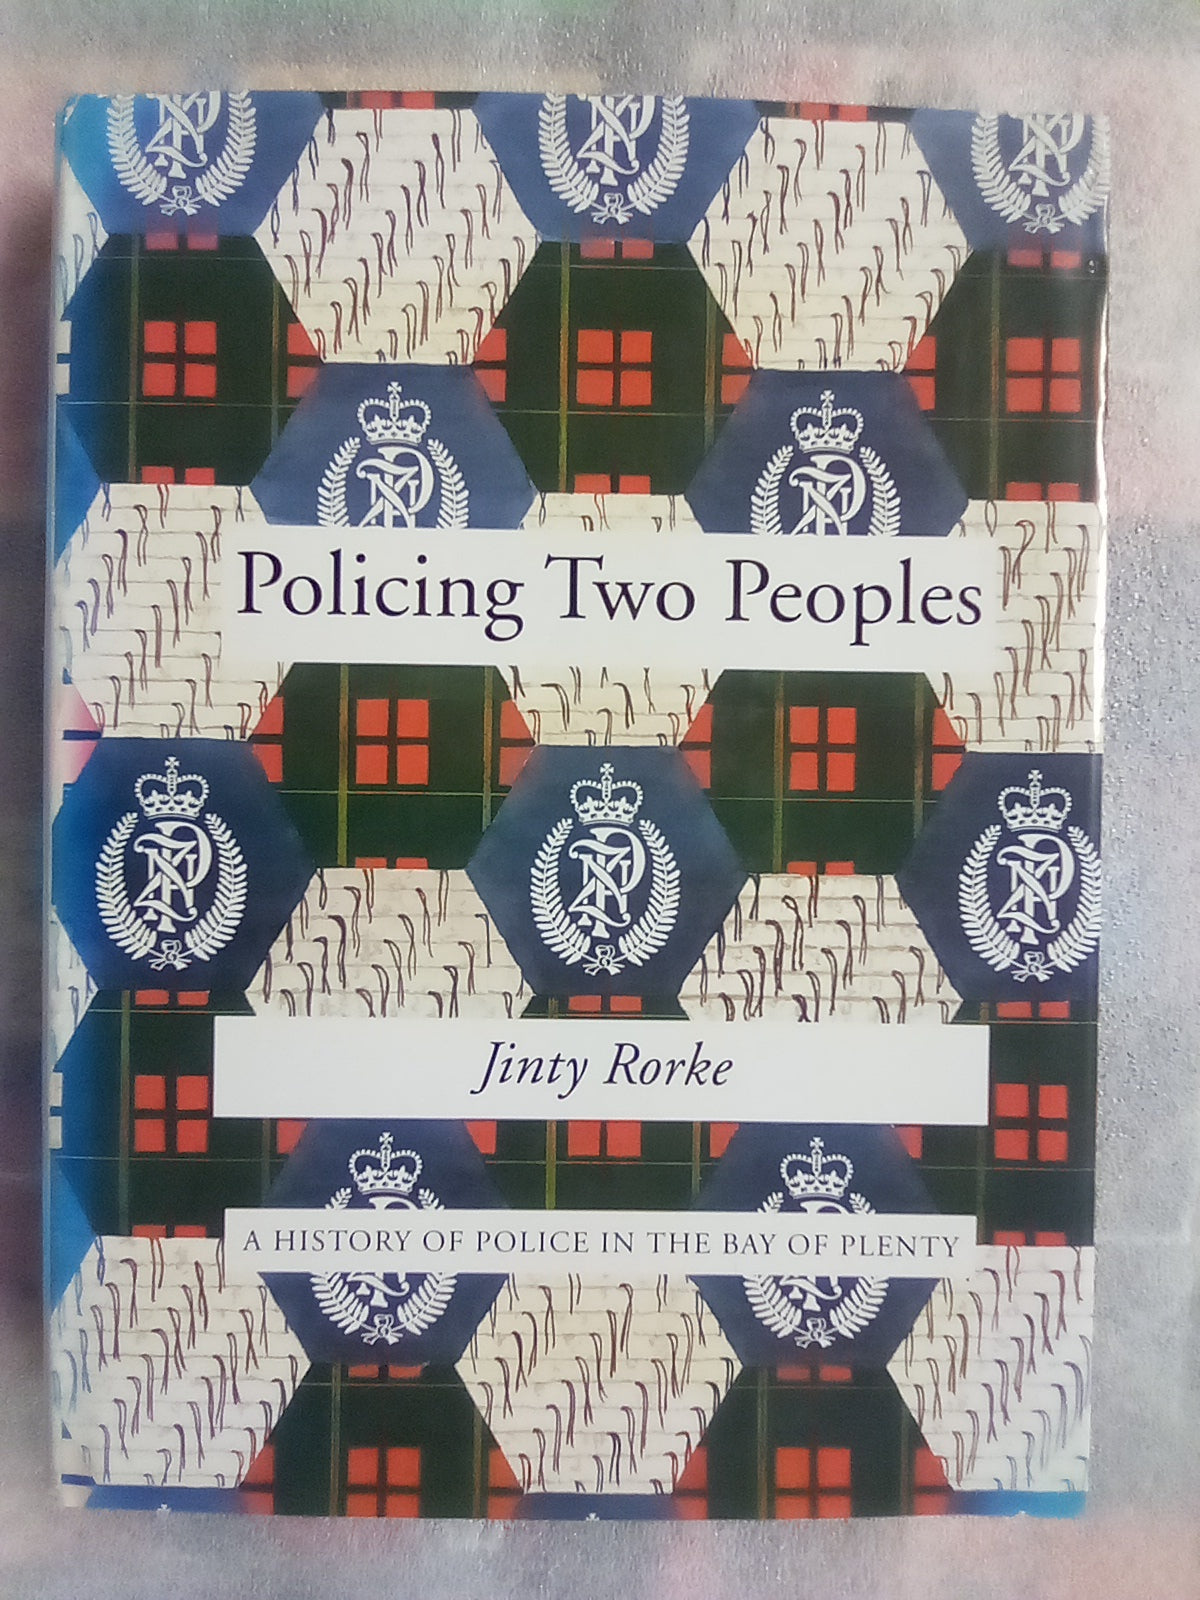 Policing Two Peoples - A History of the Bay of Plenty Police